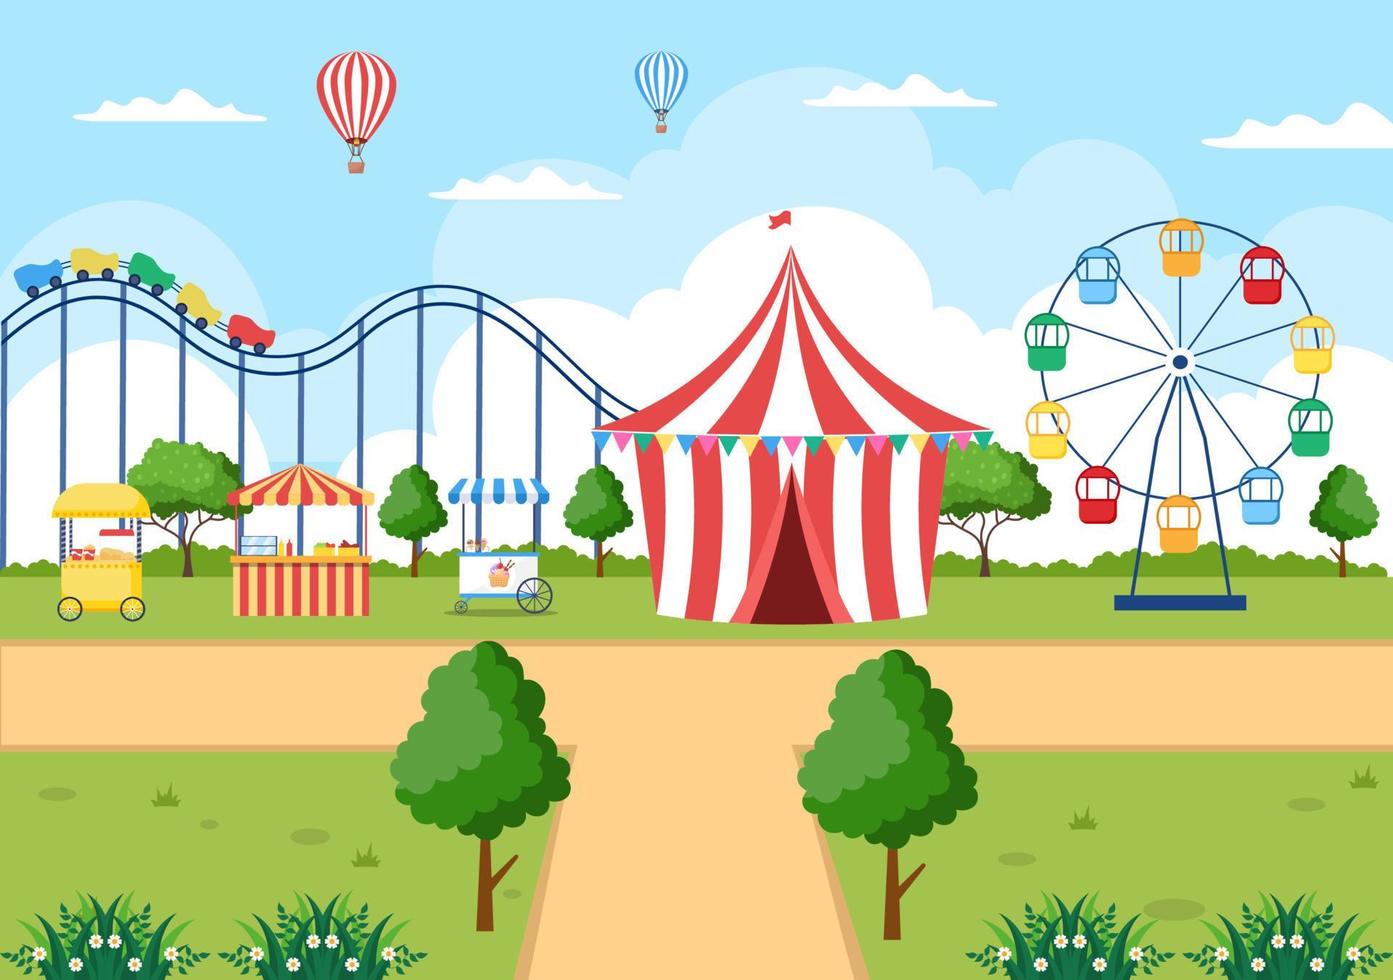 Summer Fair with Carnival, Circus, Funfair or Amusement Park. Landscape of Carousels, Roller Coaster, Air Balloon and Playground Vector Illustration